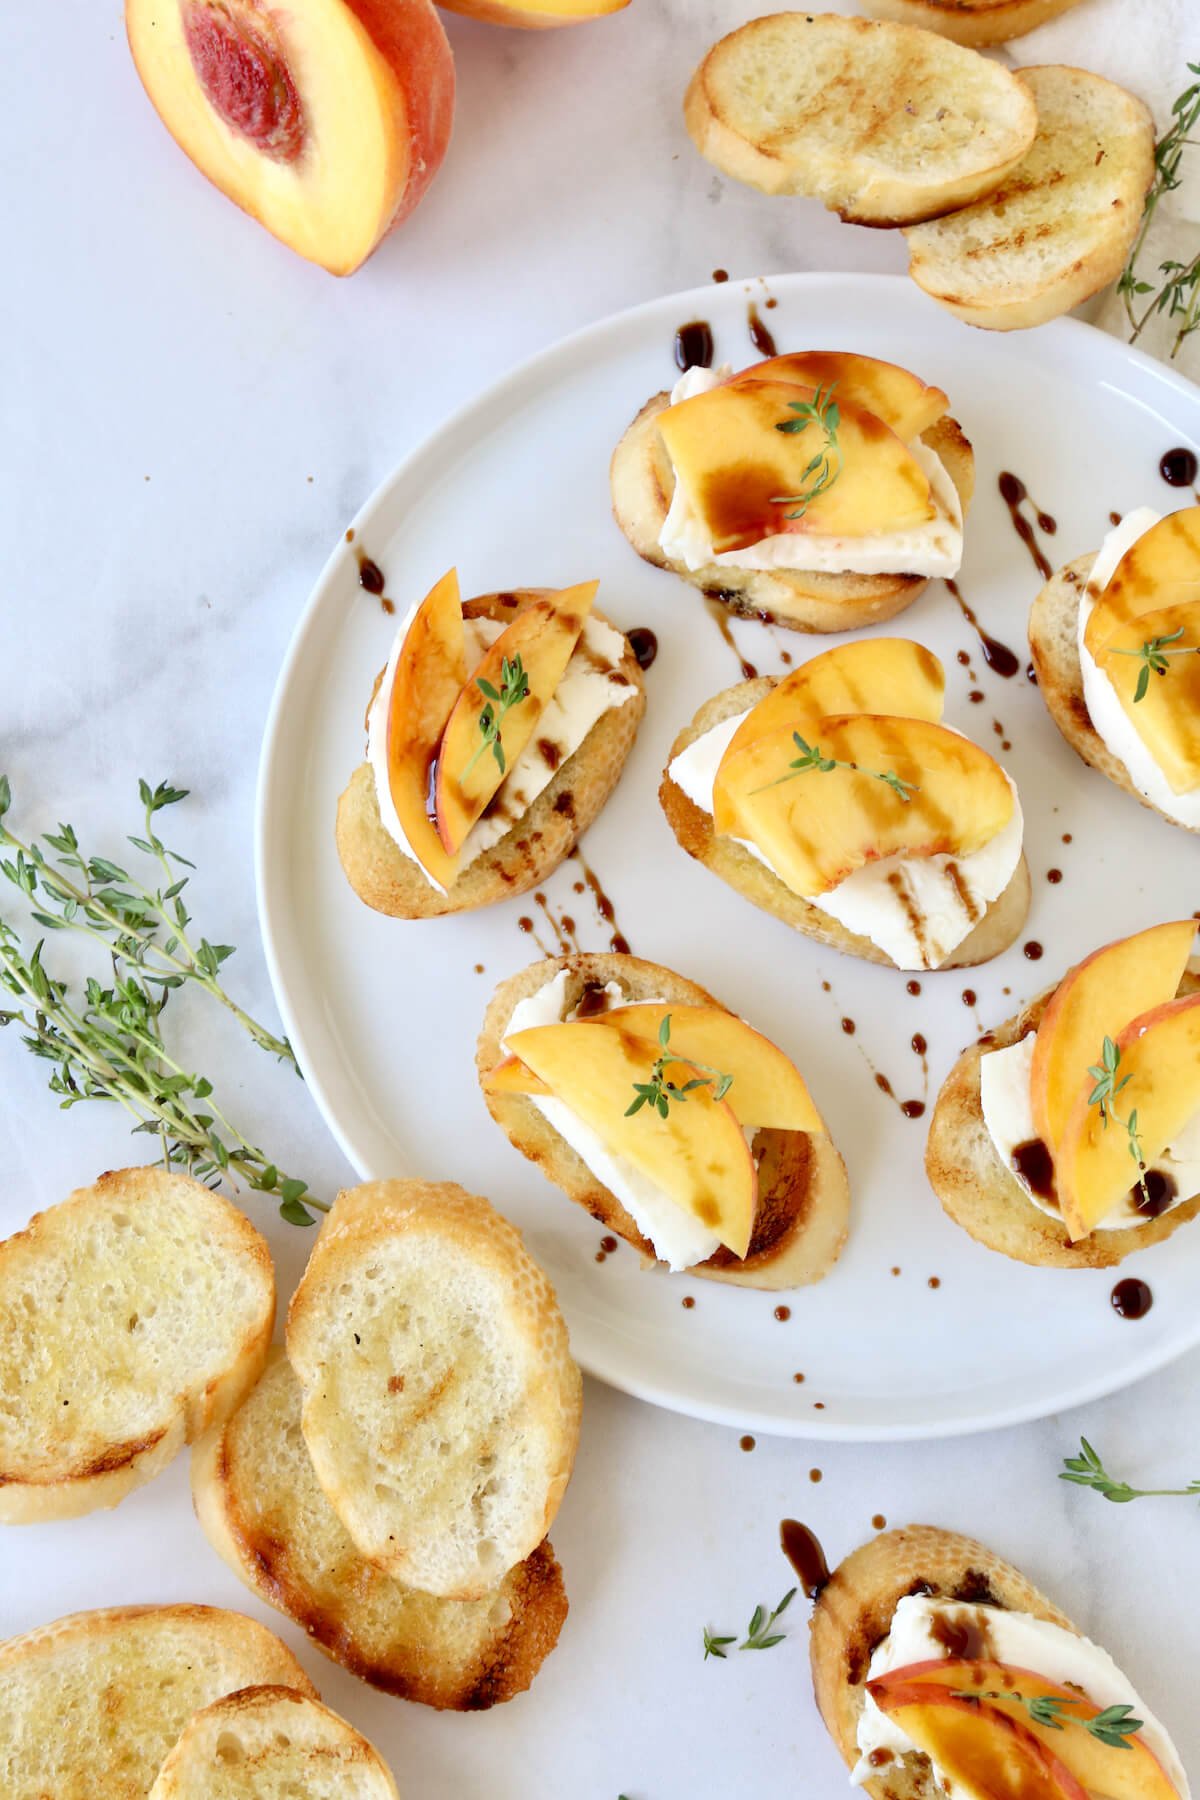 A round white place with toasted bread, mozzarella slices and sliced peaches.  